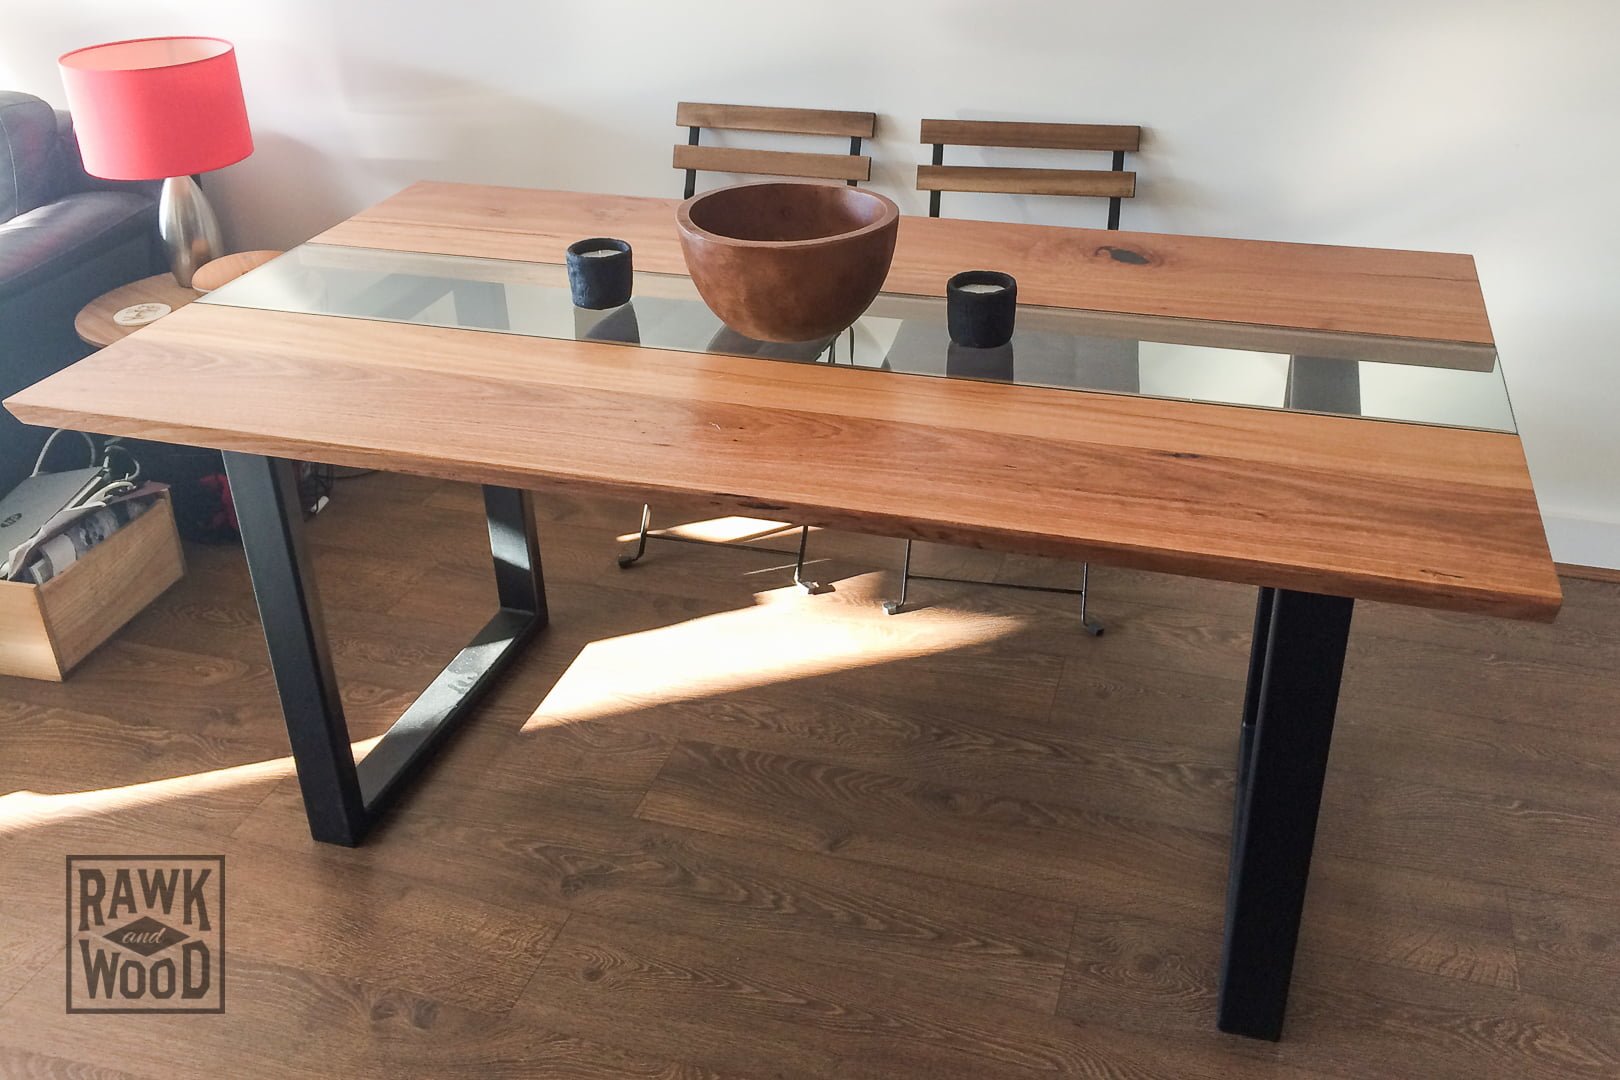 Recycled-Timber-Dining-Table, made in Melbourne by Rawk and Wood